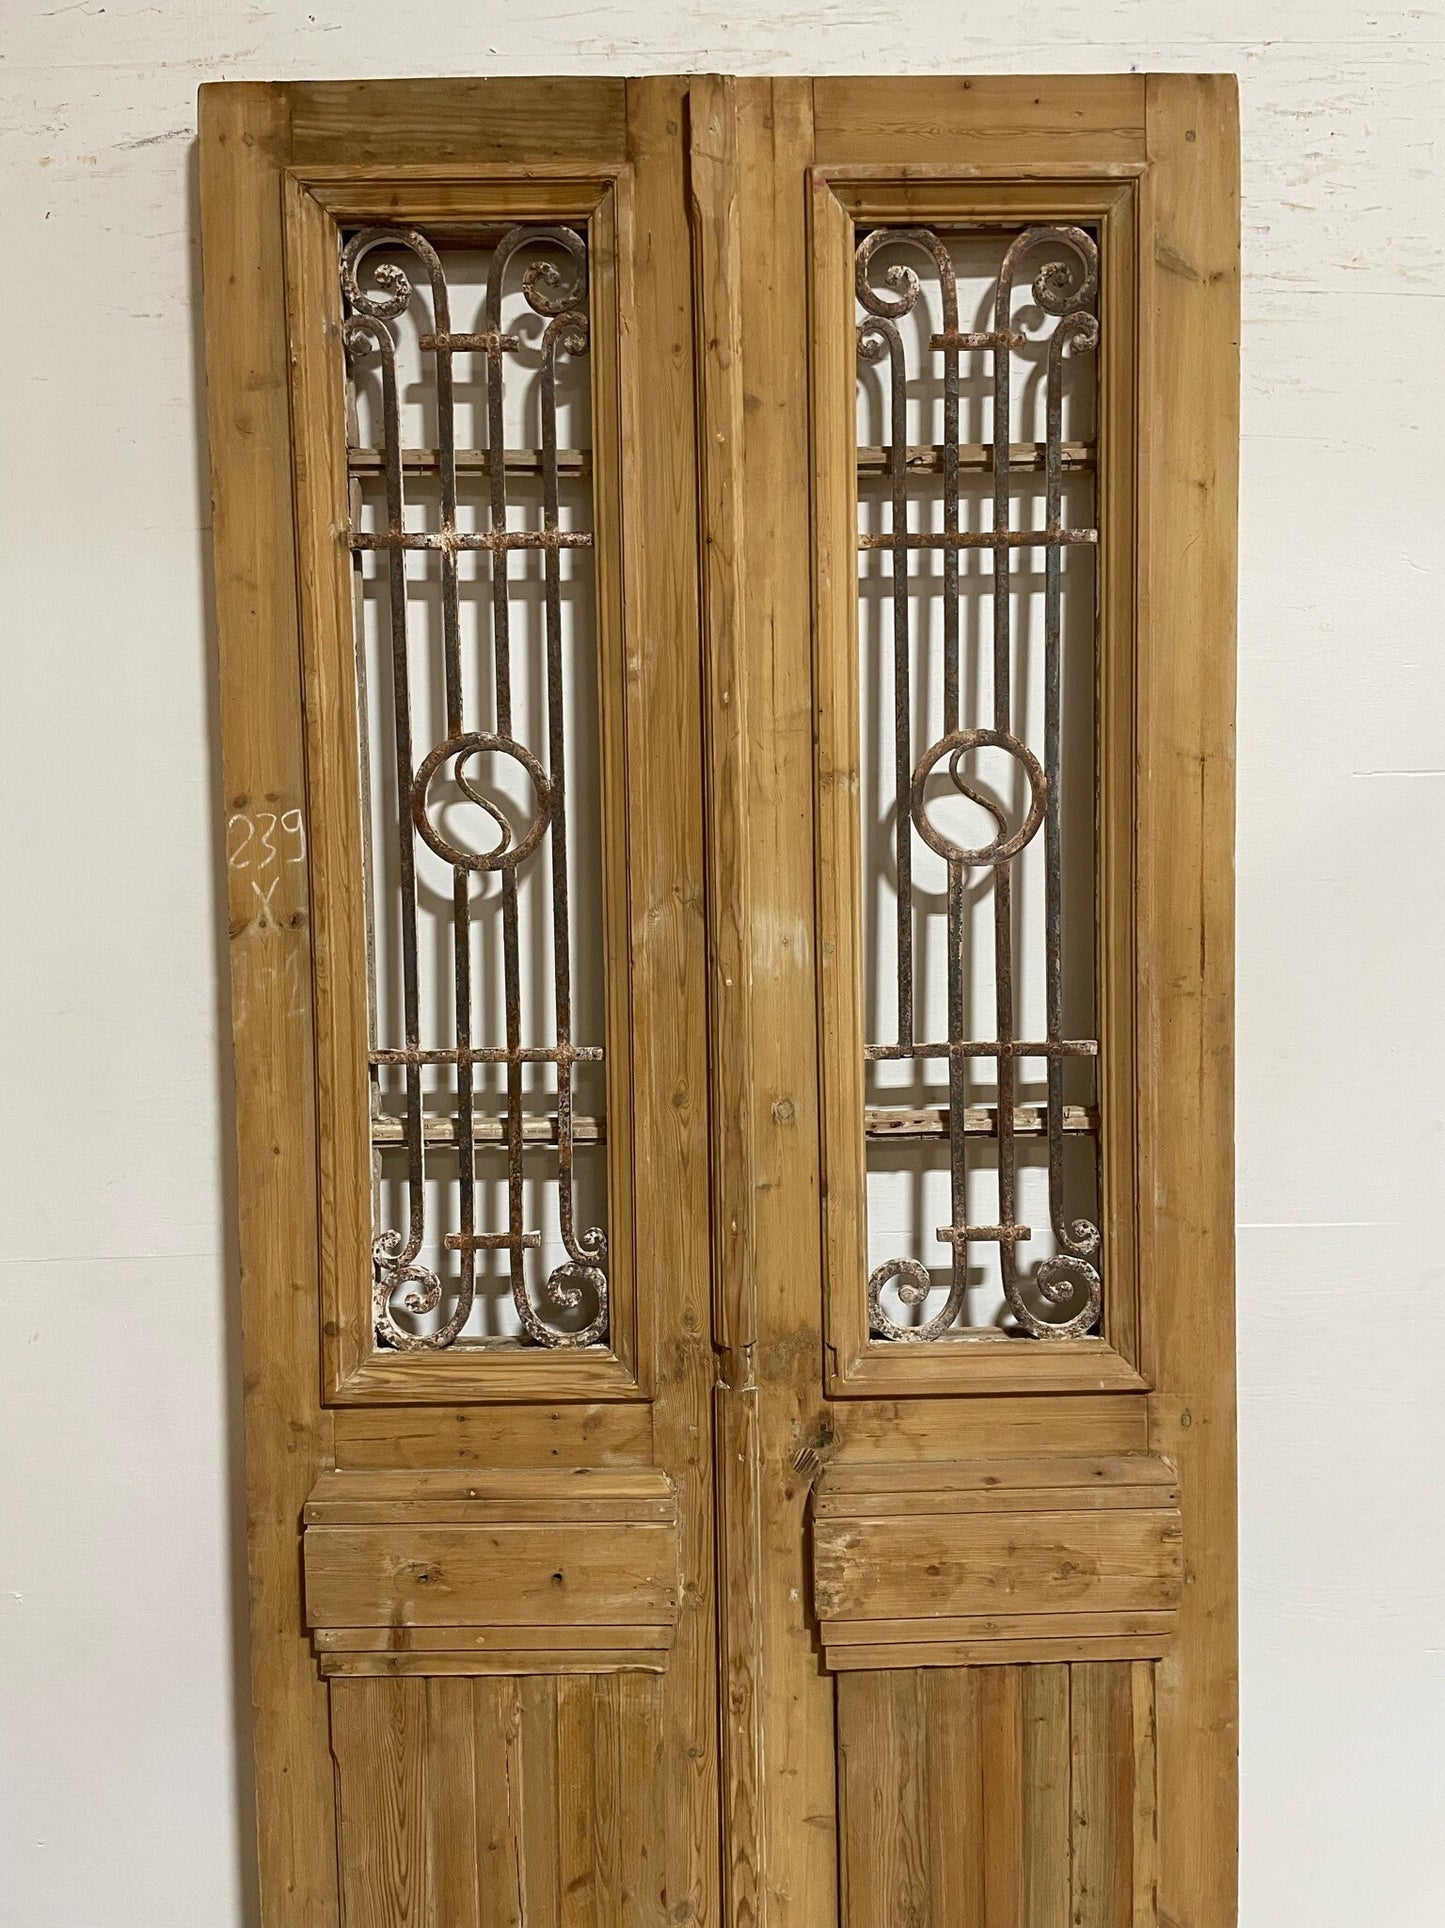 Antique French door (93.75x40) with metal E11